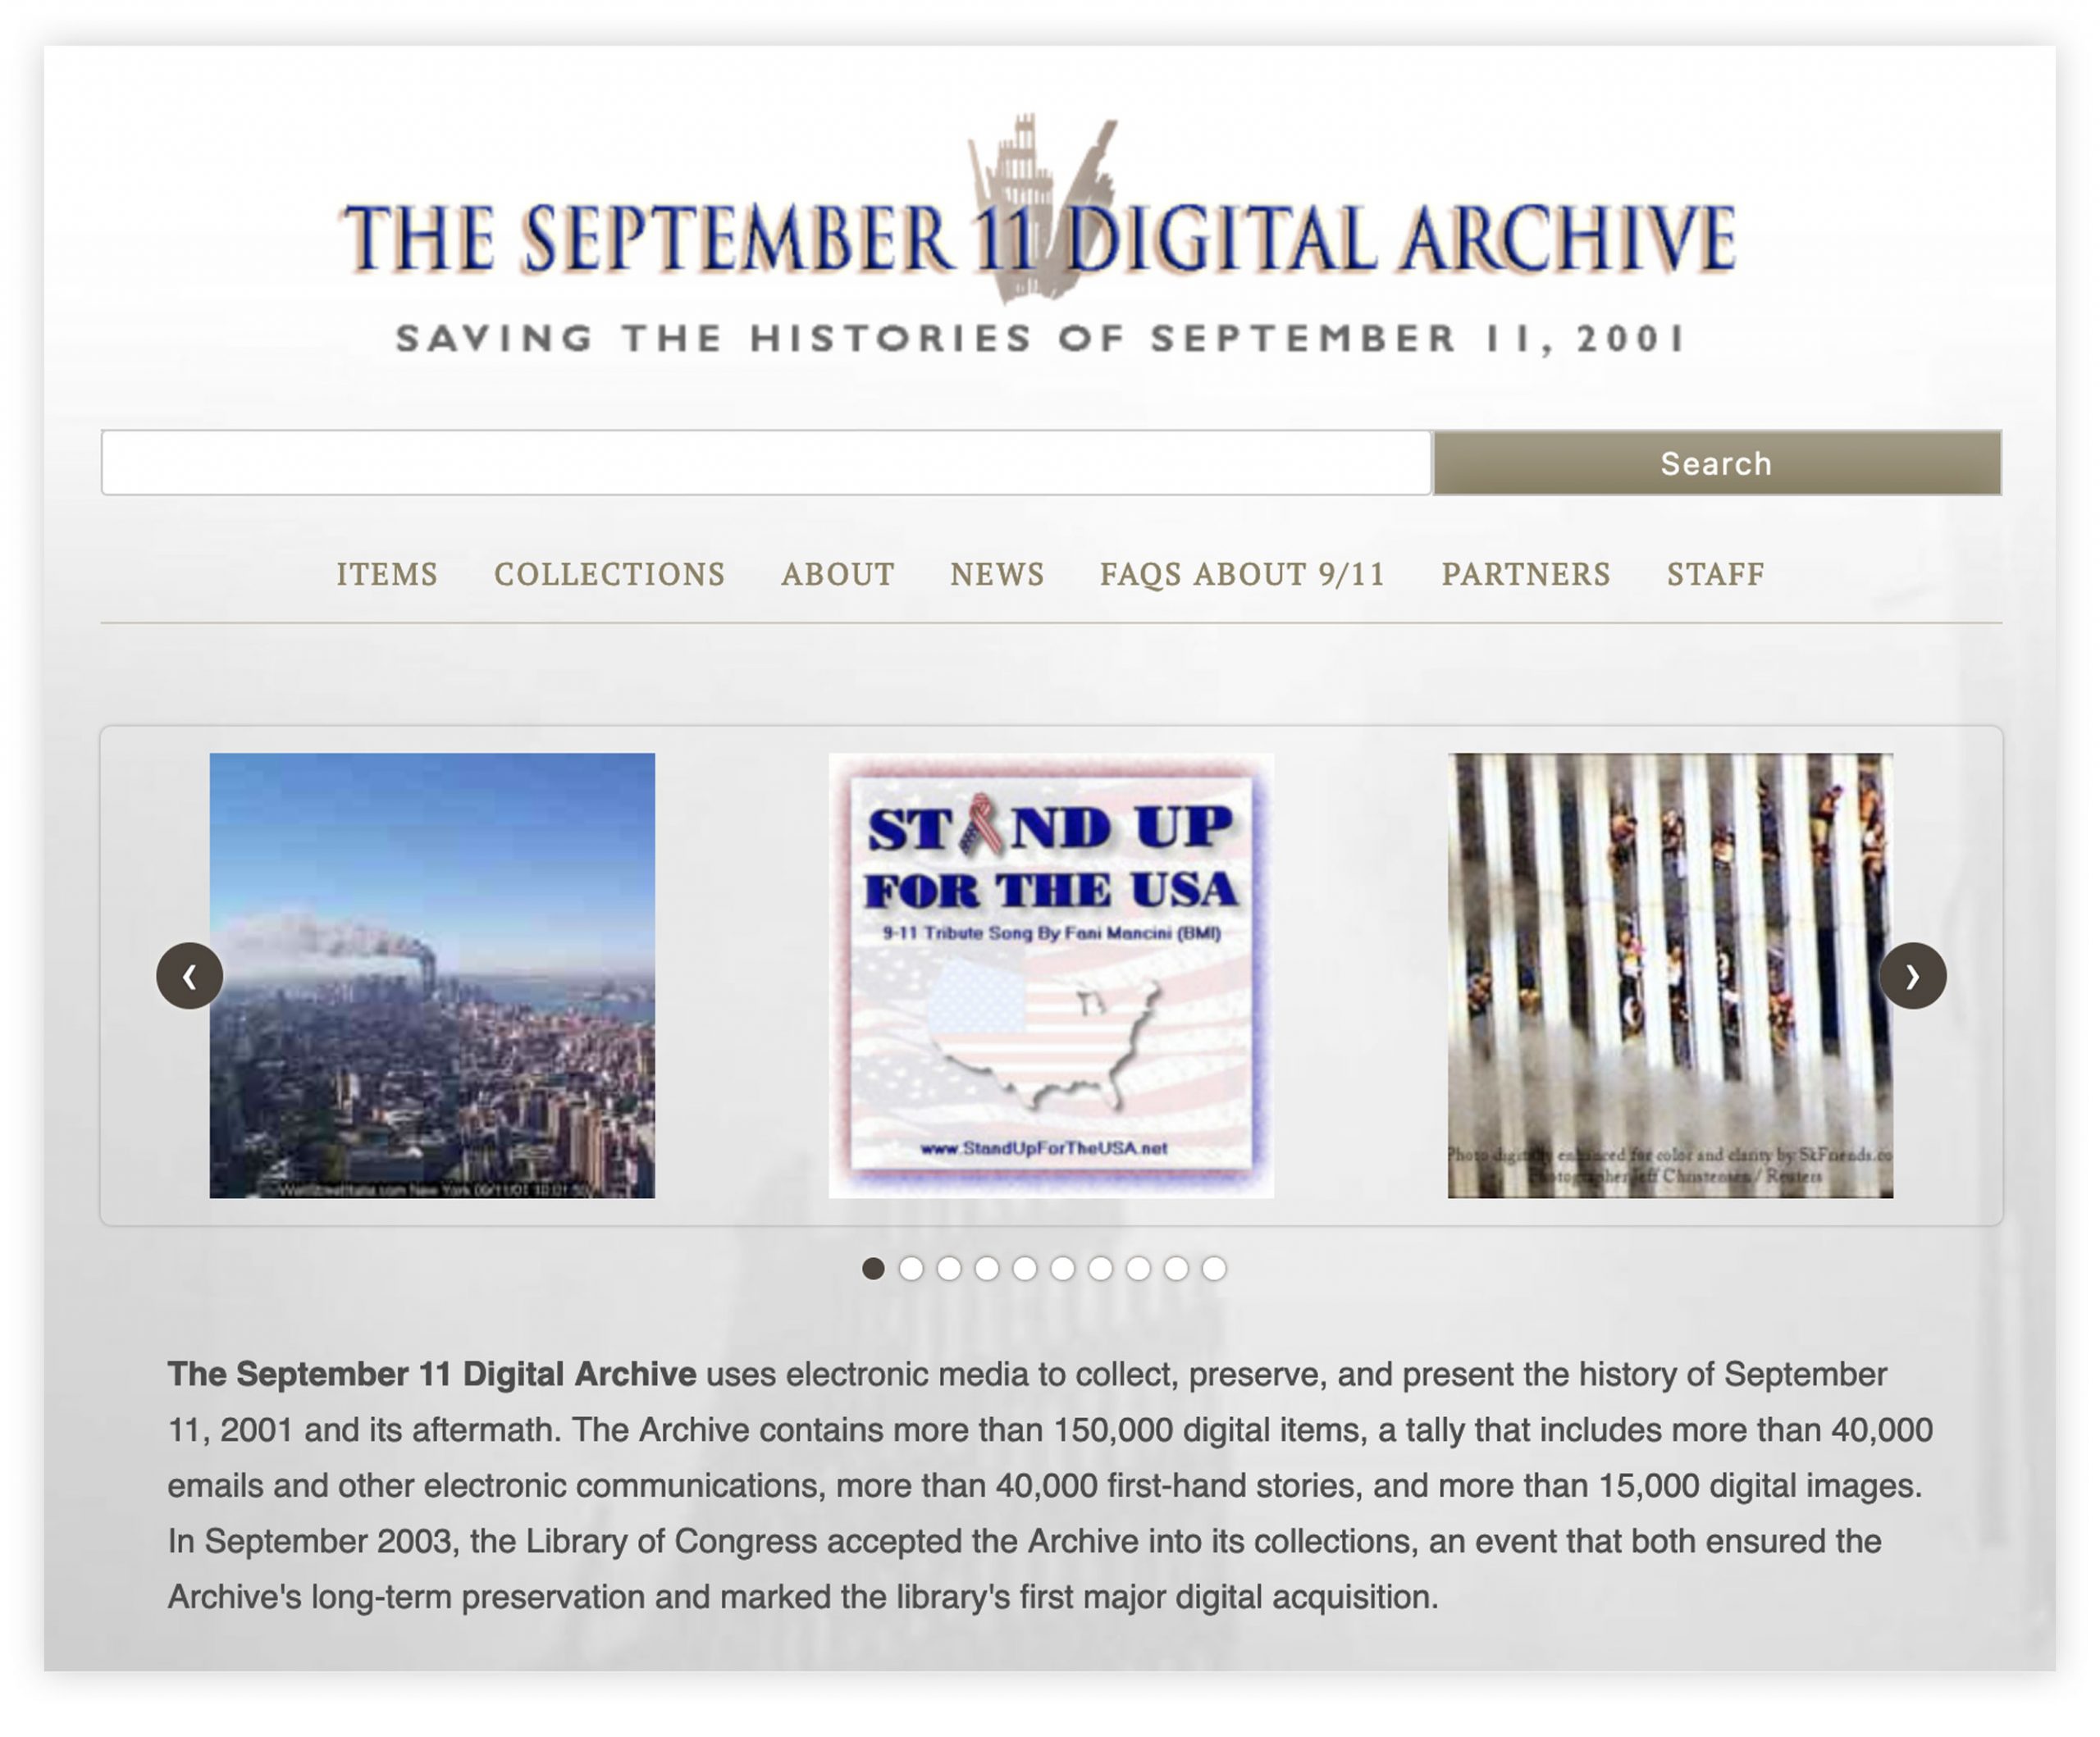 Screengrab of The September 11 Digital Archive website home page.